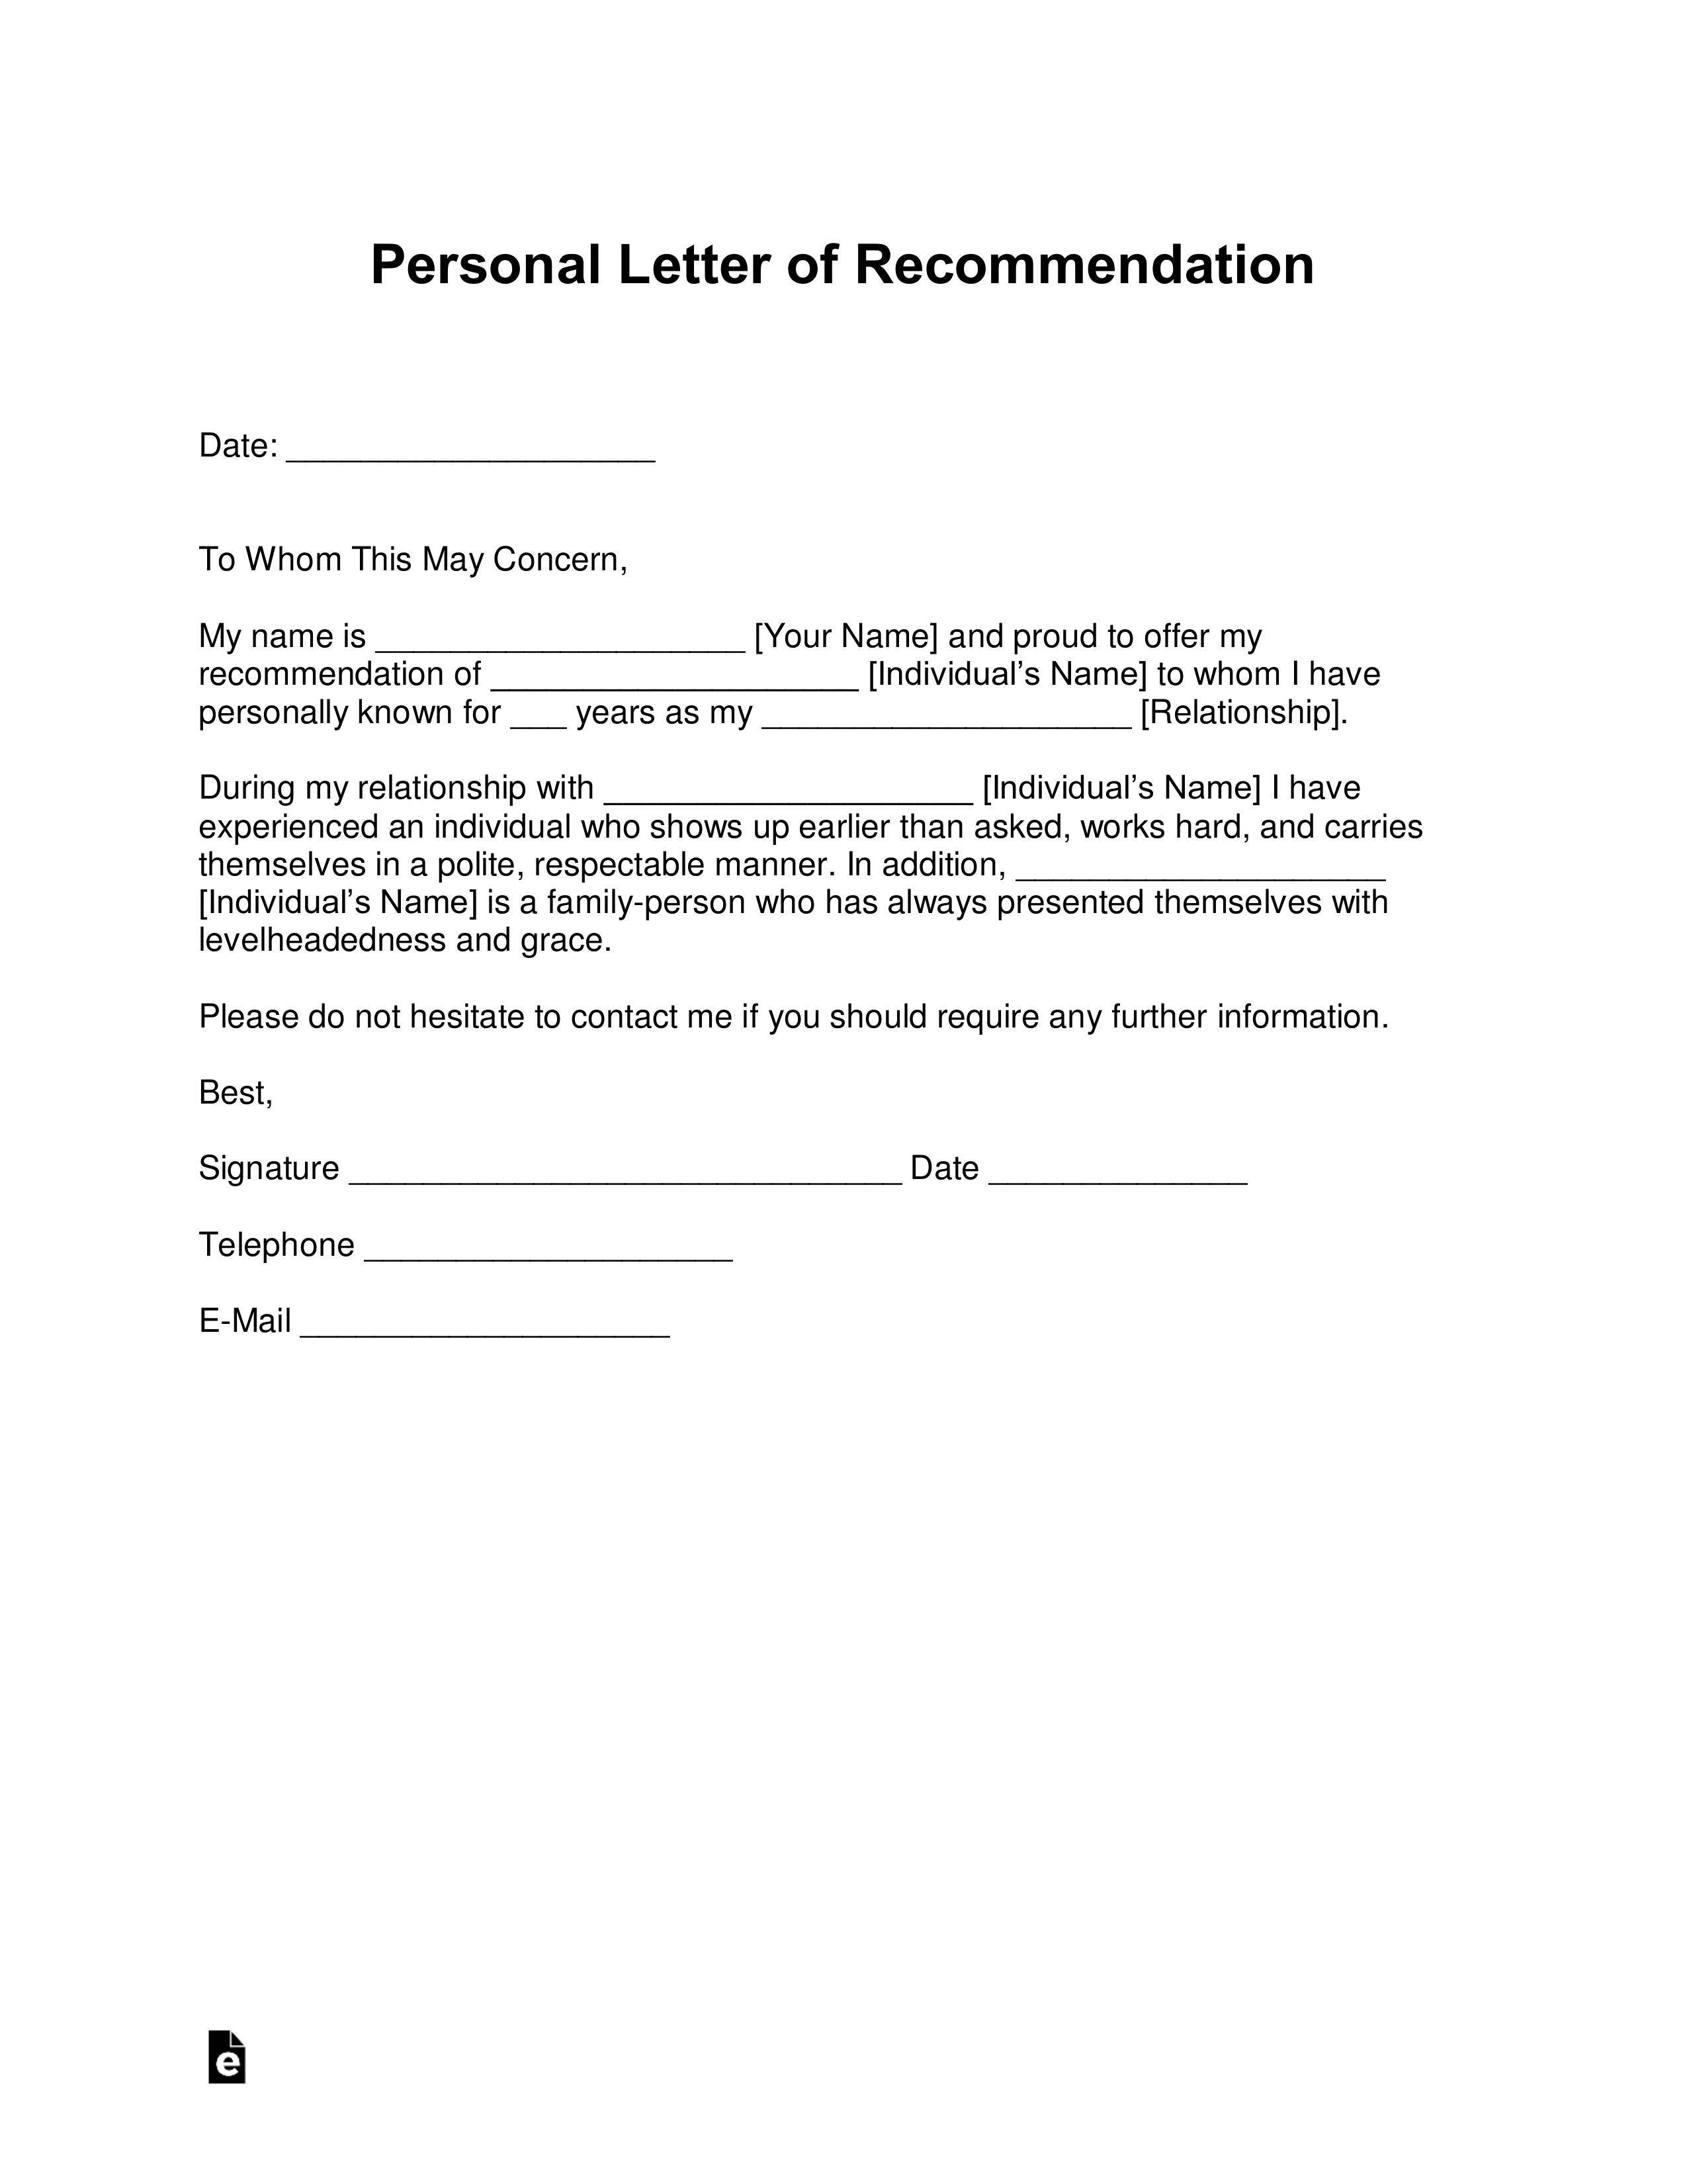 Letter Of Recommendation For A Job For A Friend from eforms.com